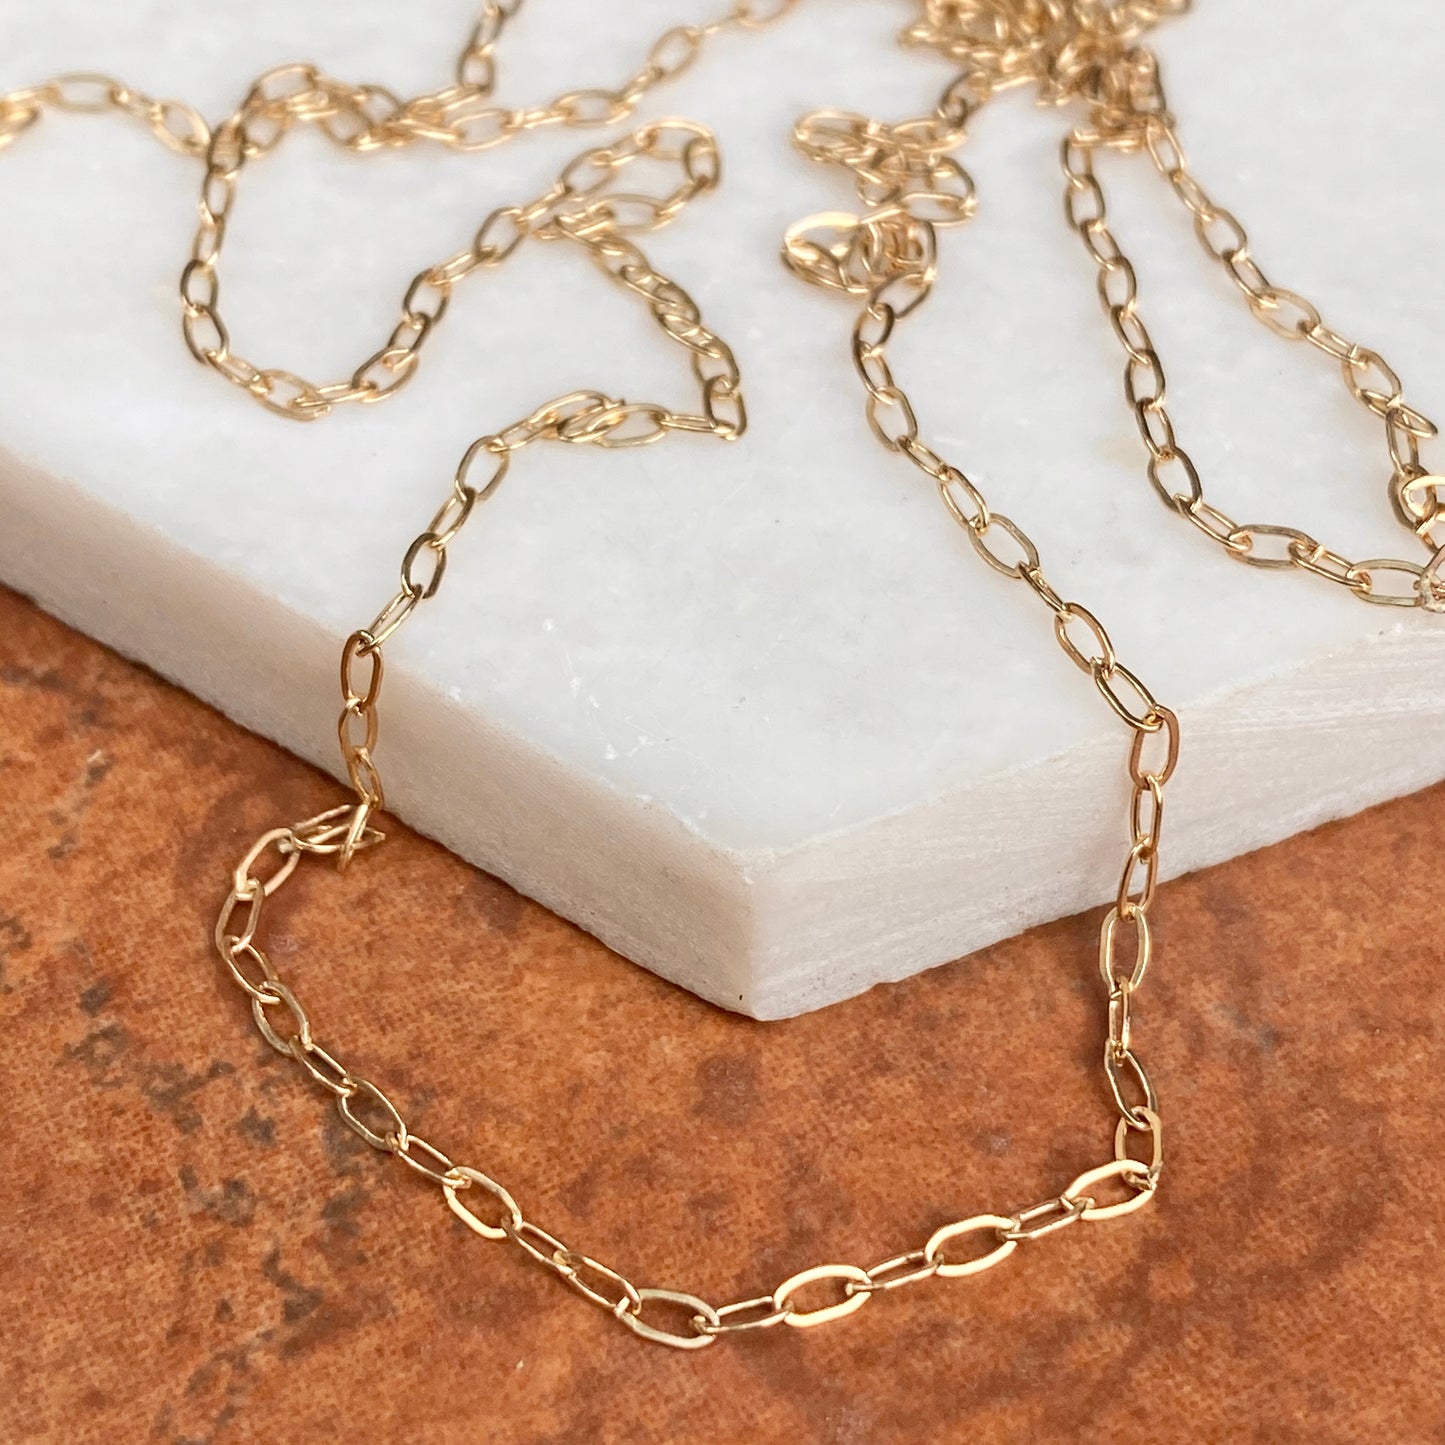 14KT Yellow Gold Polished Flat Open Paper Clip Chain Link Necklace 1.8mm, 14KT Yellow Gold Polished Flat Open Paper Clip Chain Link Necklace 1.8mm - Legacy Saint Jewelry